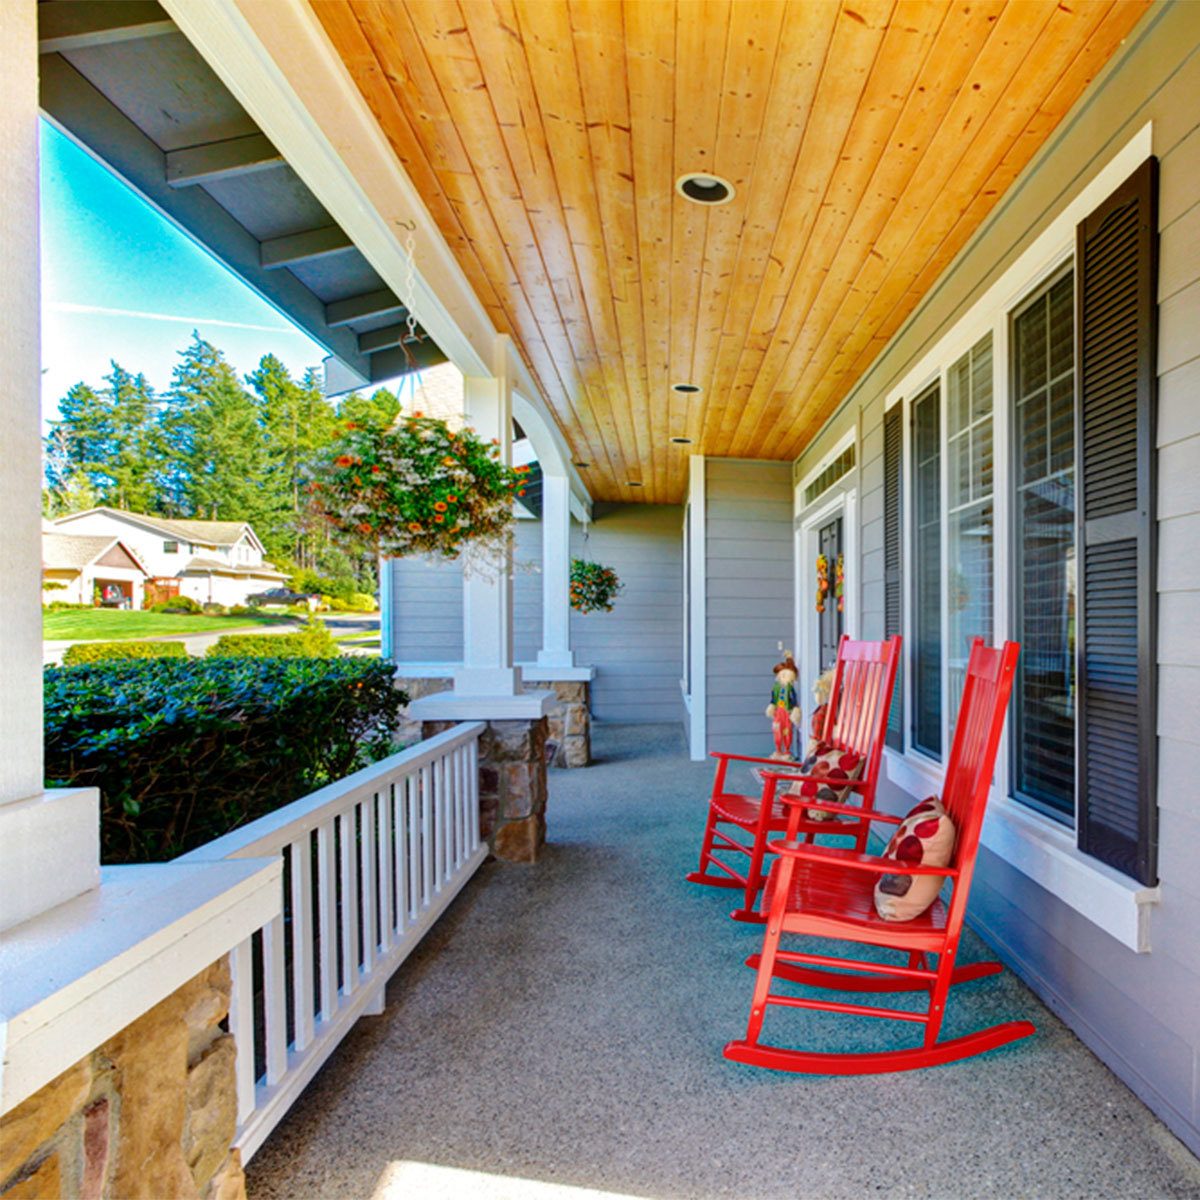 Farmhouse Look: Front Porch Sitting